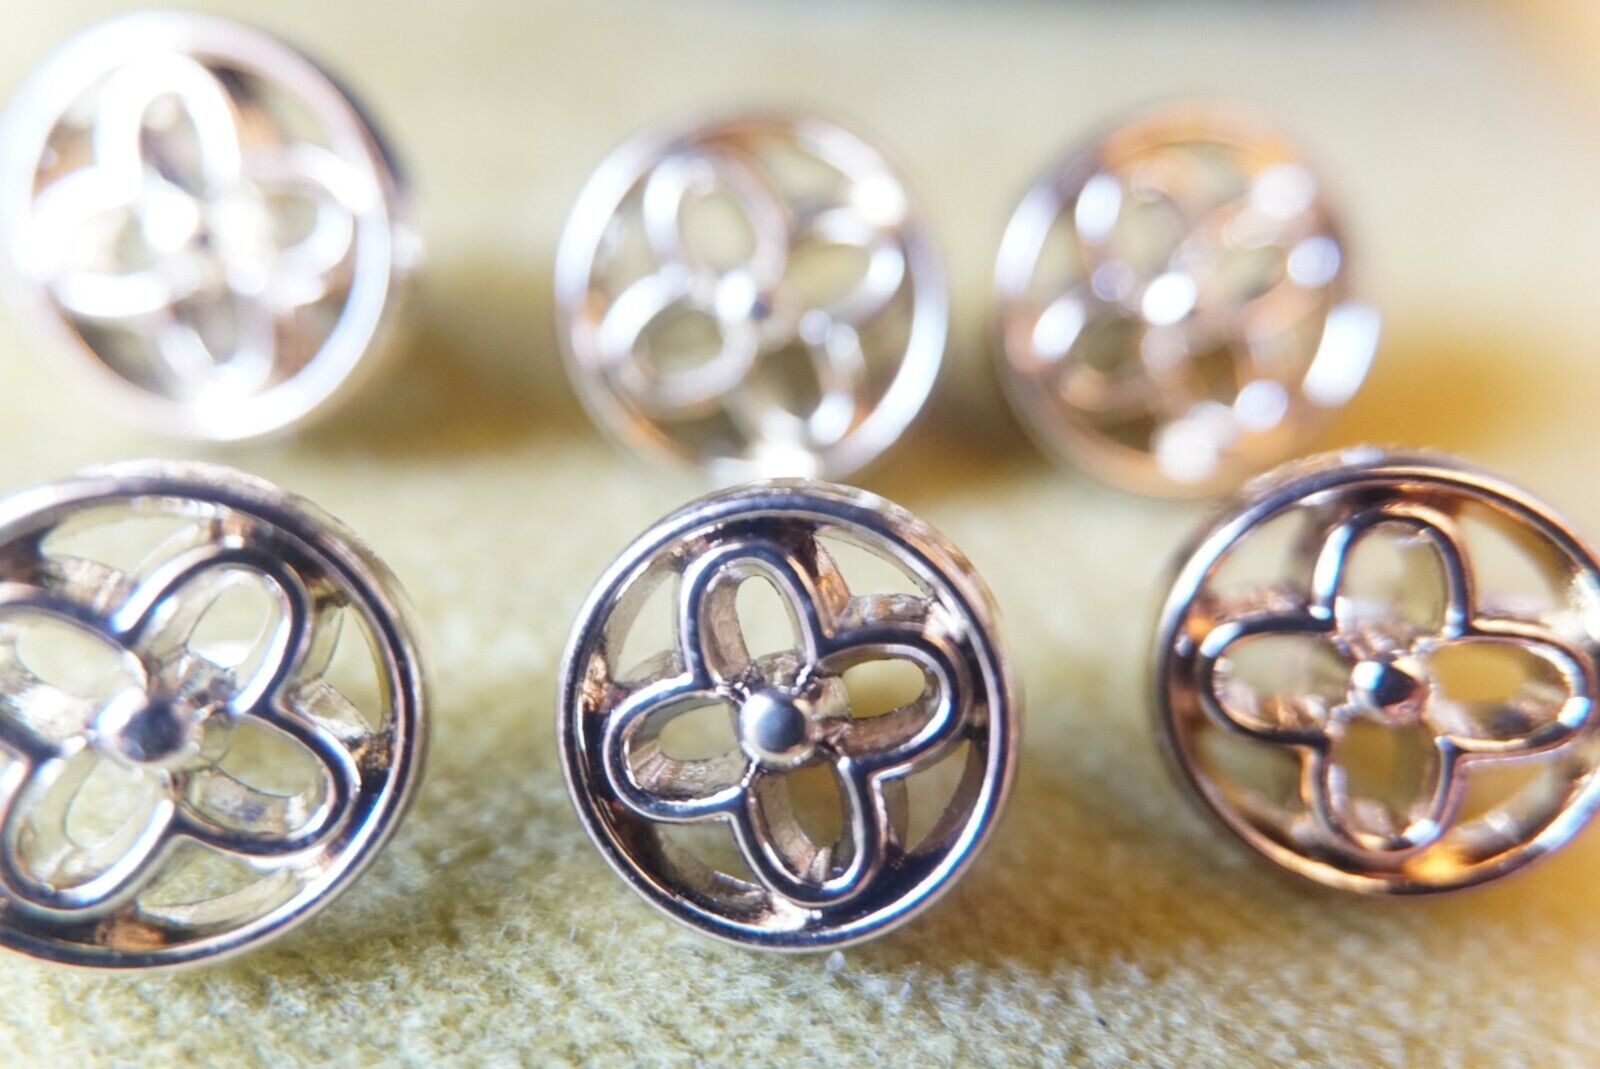 100% Louis Vuitton  buttons 6 pcs gold   Size: 14 mm or 0,4 inch metal